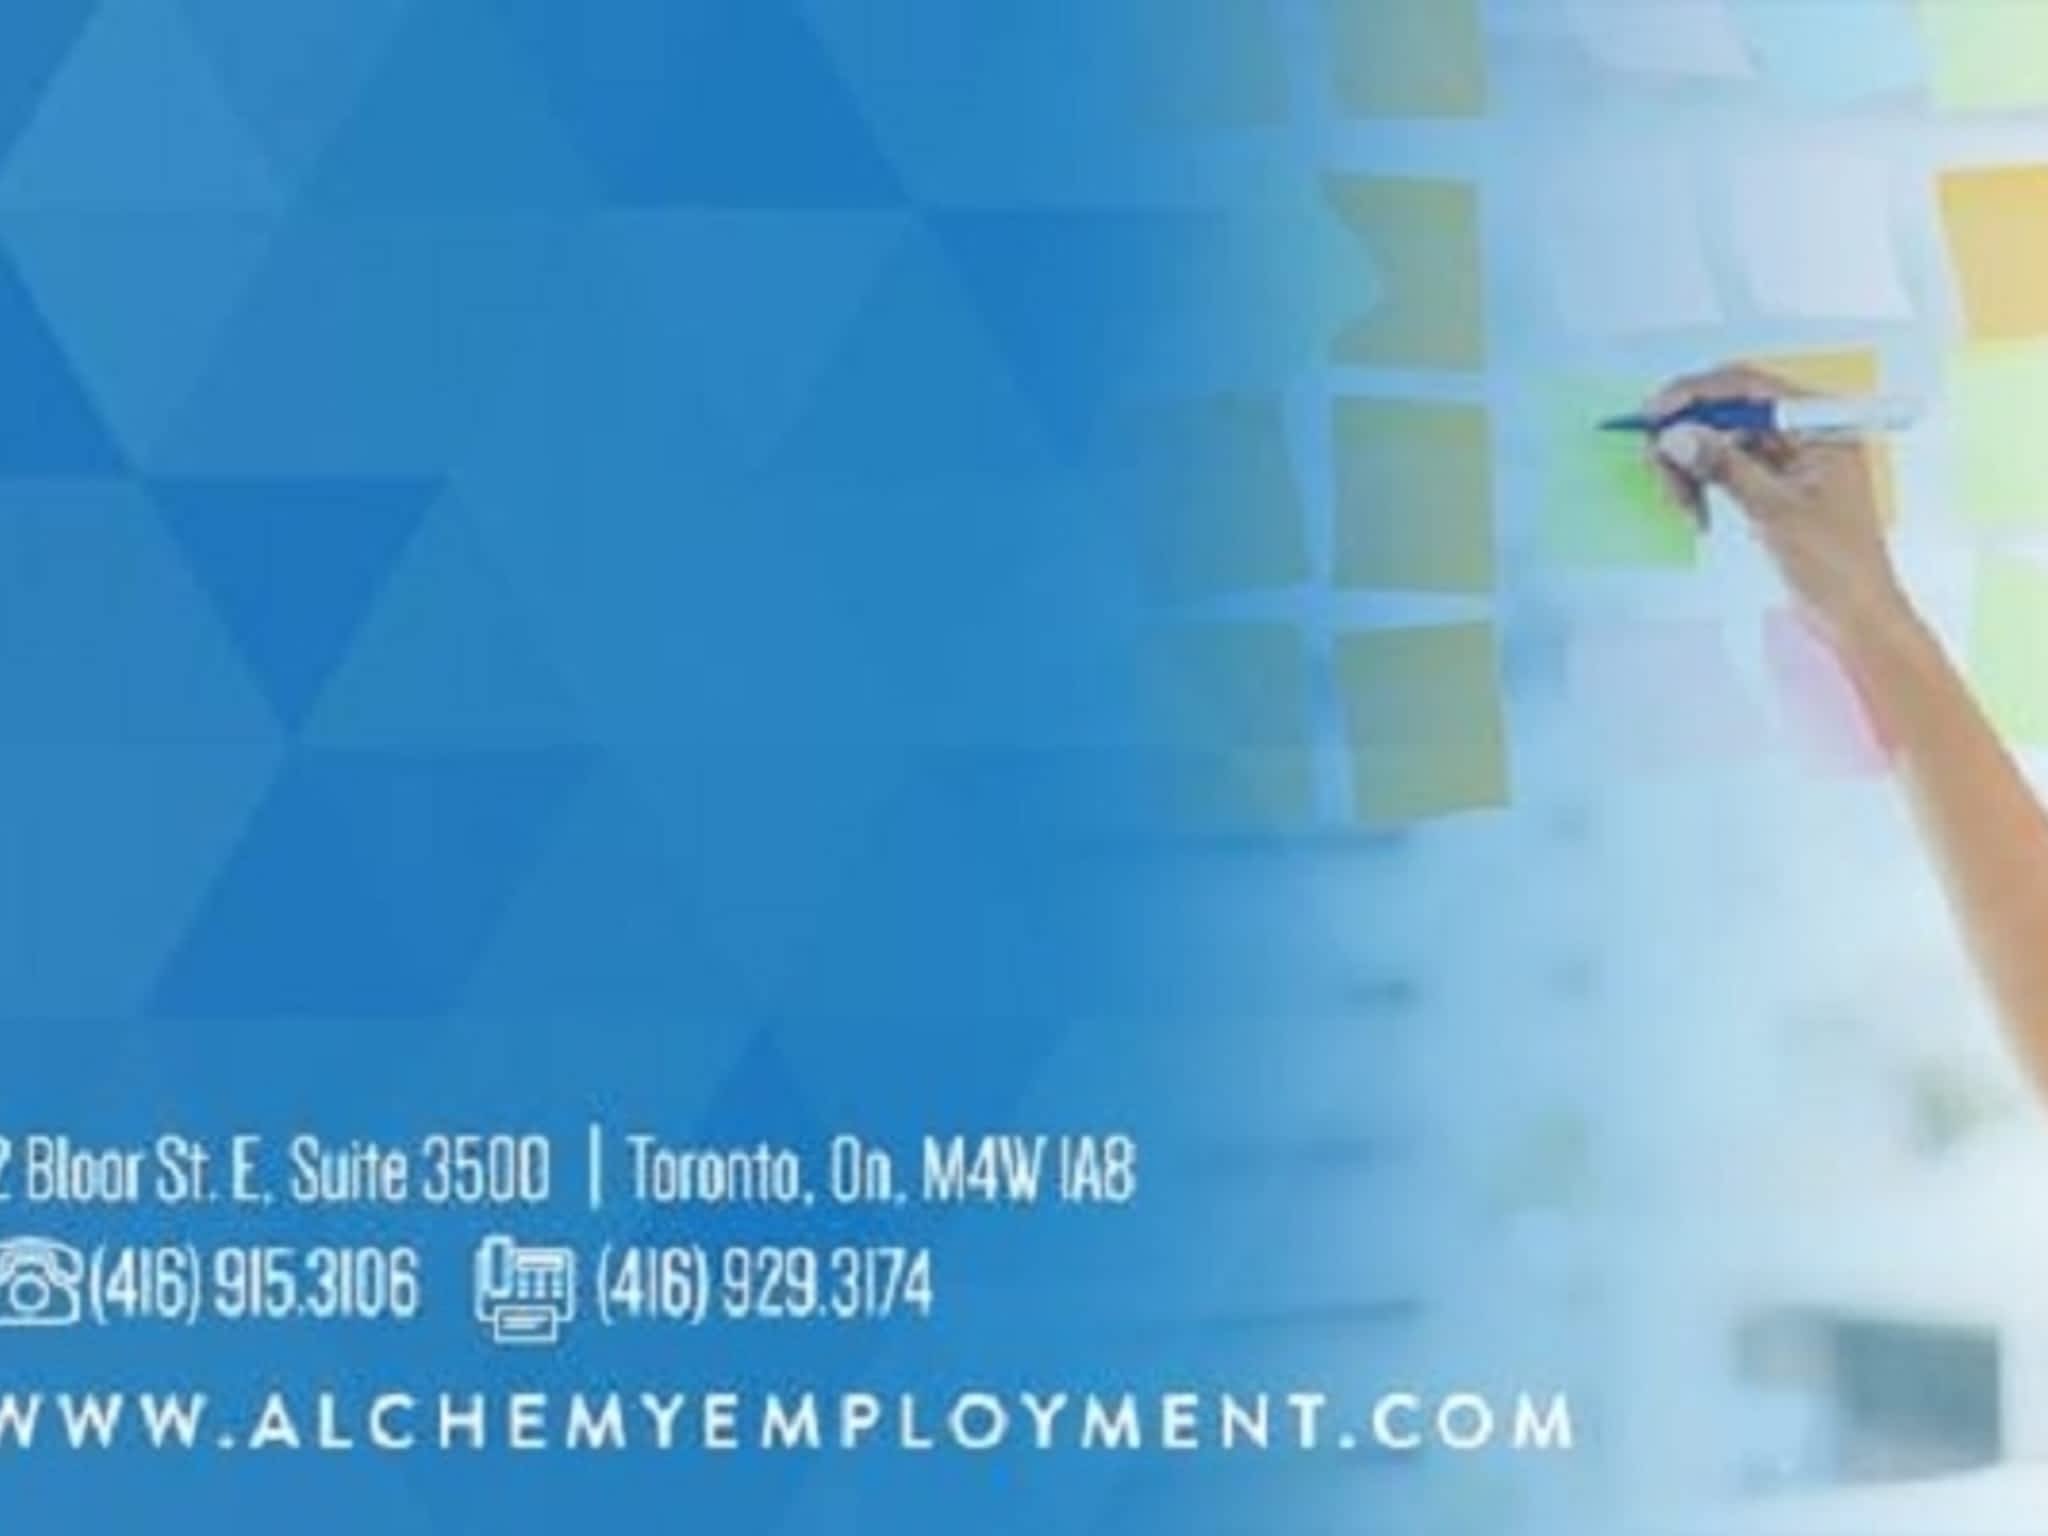 photo Alchemy Employment Agency & Career Growth Services